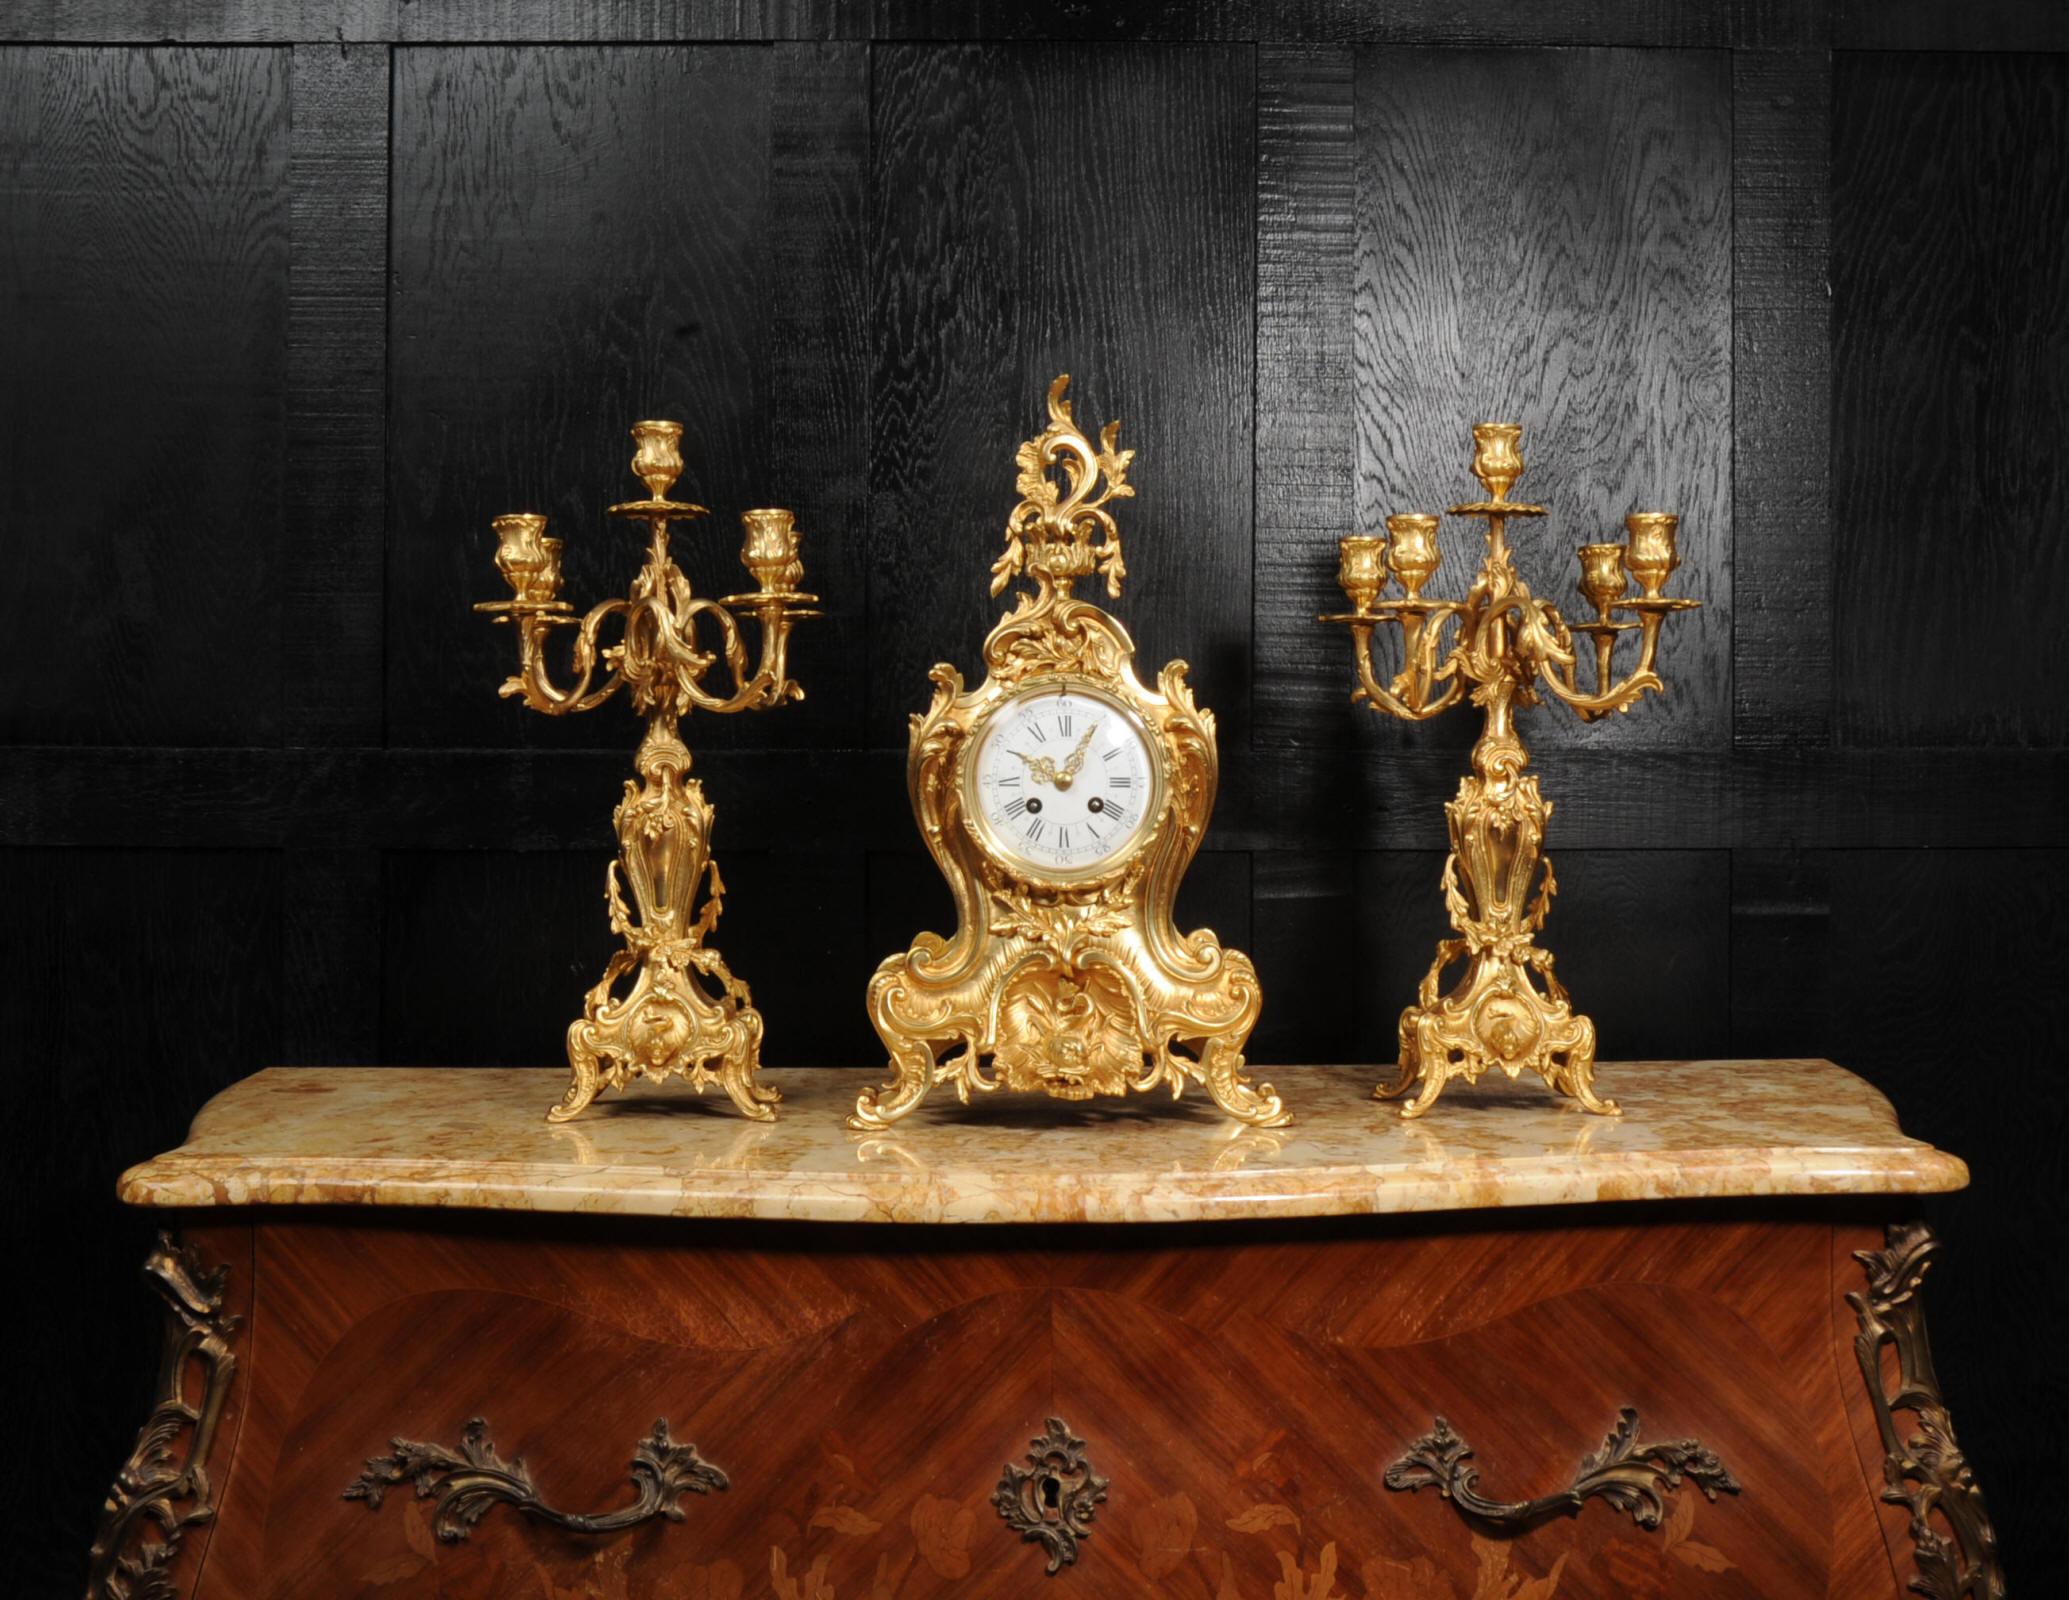 A stunning and large original antique French ormolu clock set by A. D. Mougin. It is of the most beautiful Rococo style, featuring a dolphin in a niche, and decorated with 'C' scrolls, acanthus leaves, laurel sprigs and floral swags. Candelabra have